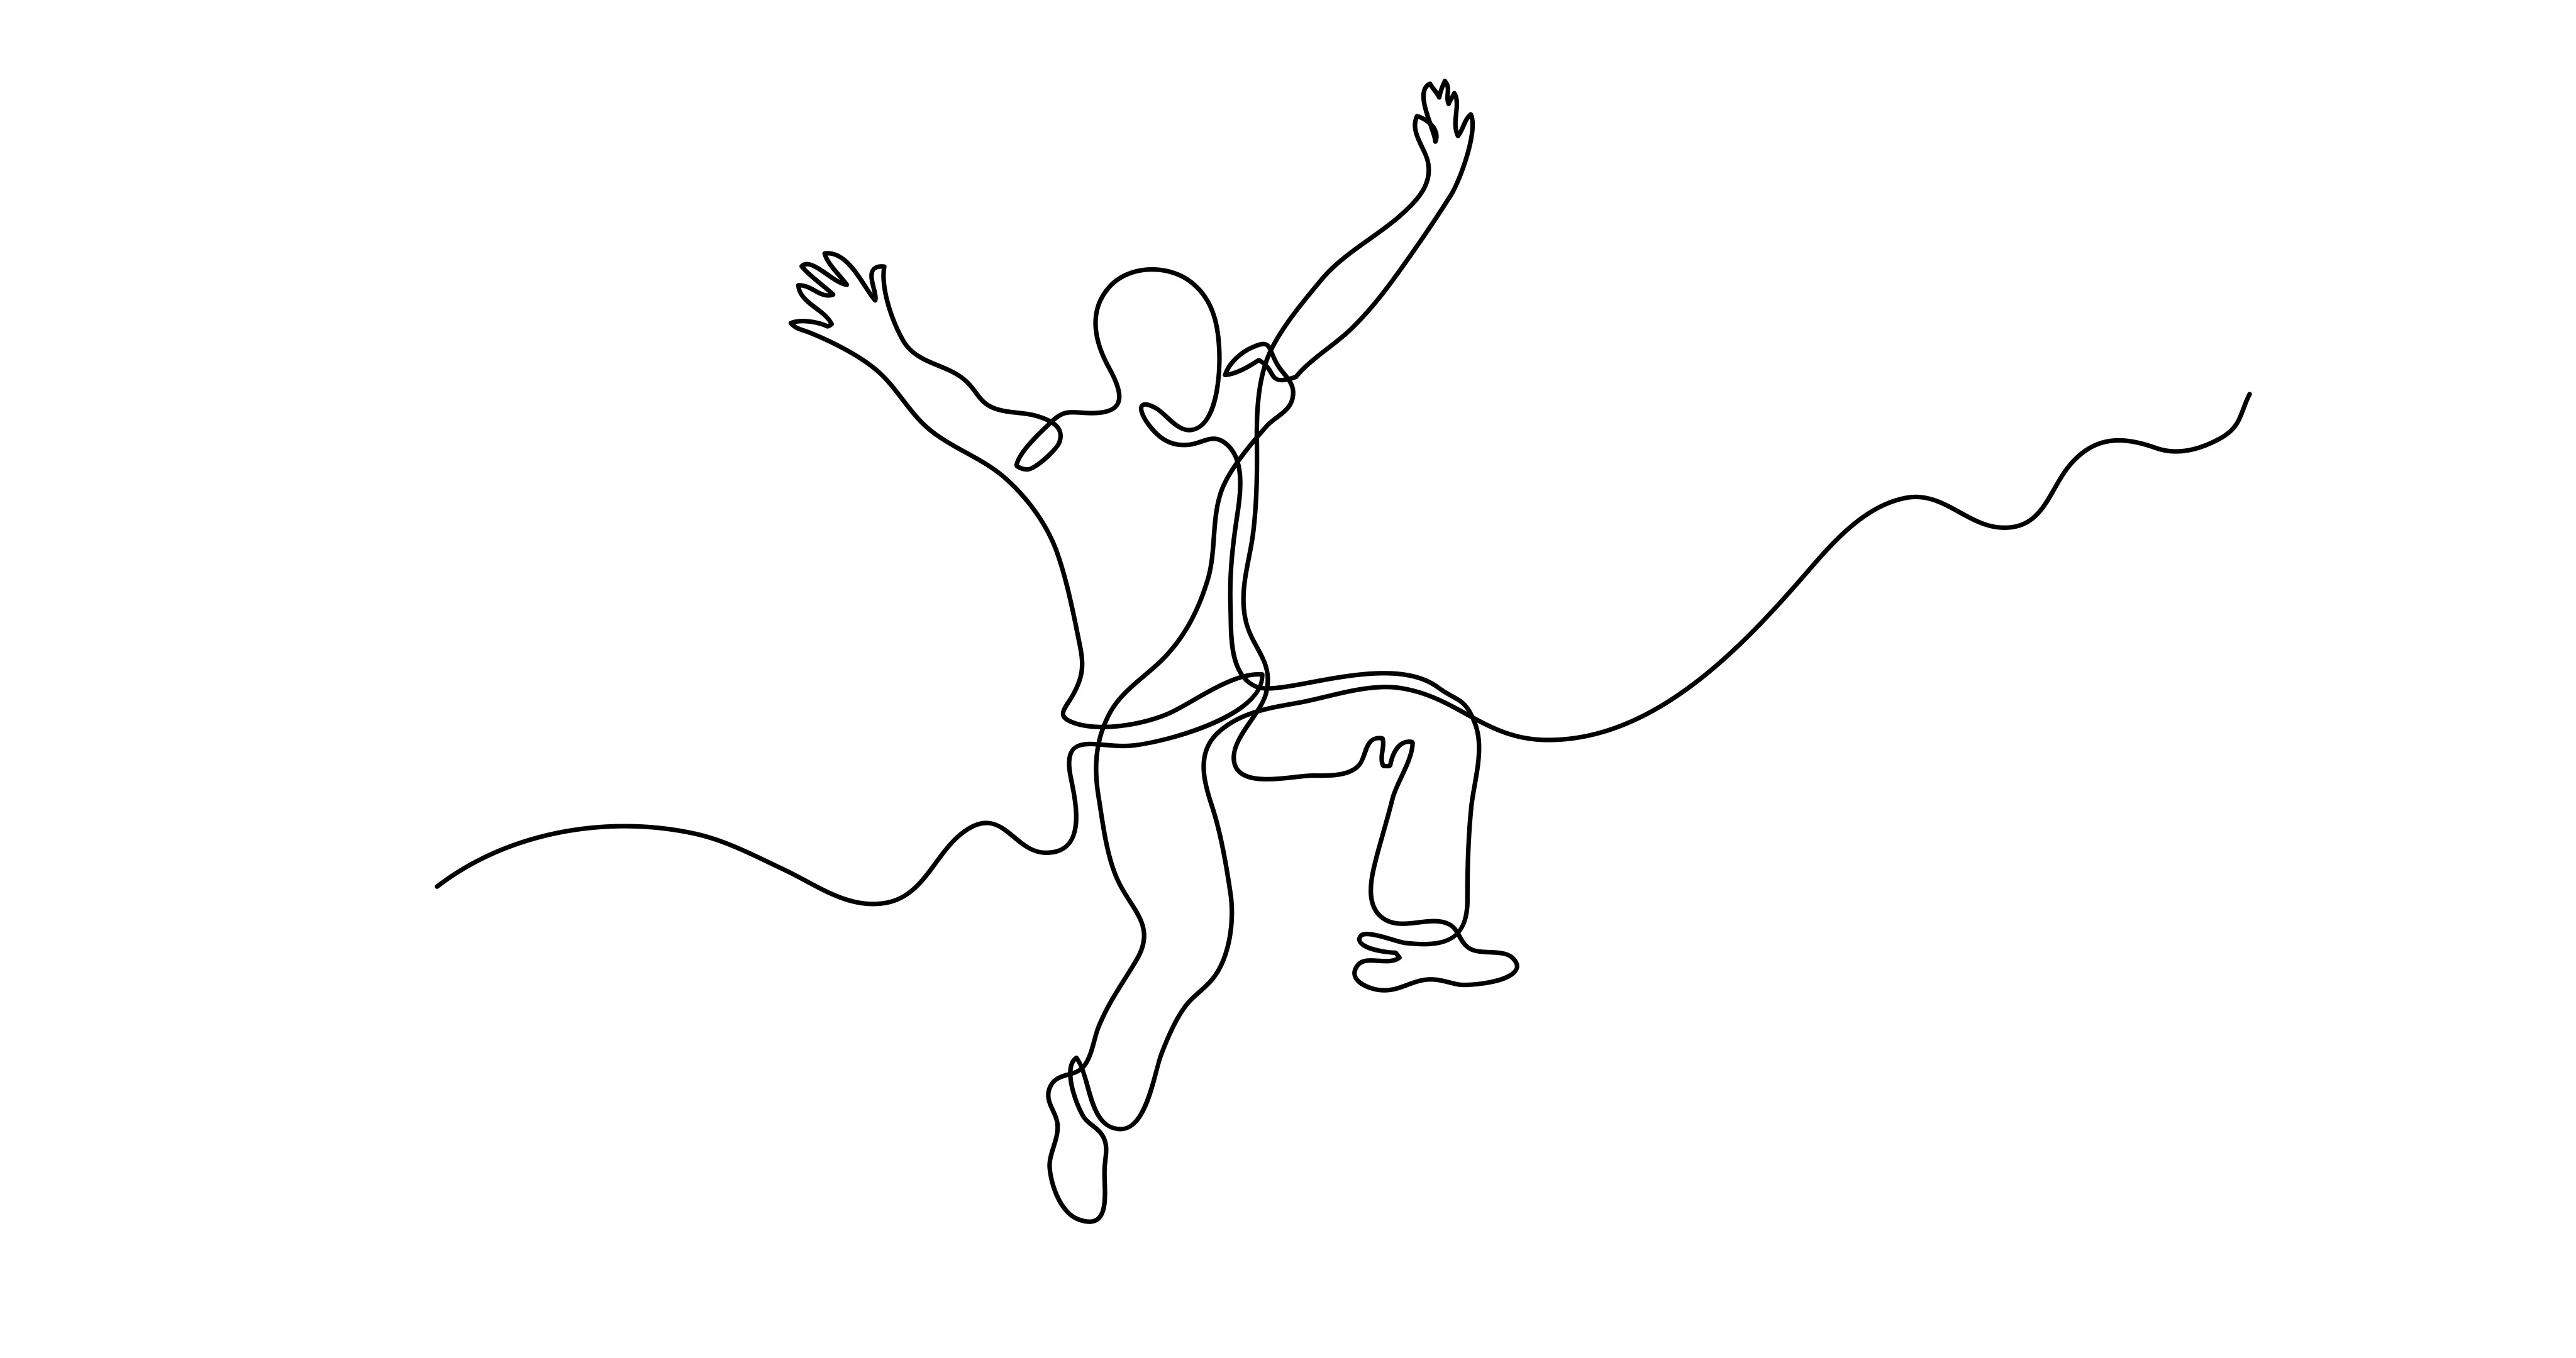 Self drawing animation of continuous lin... | Stock Video | Pond5